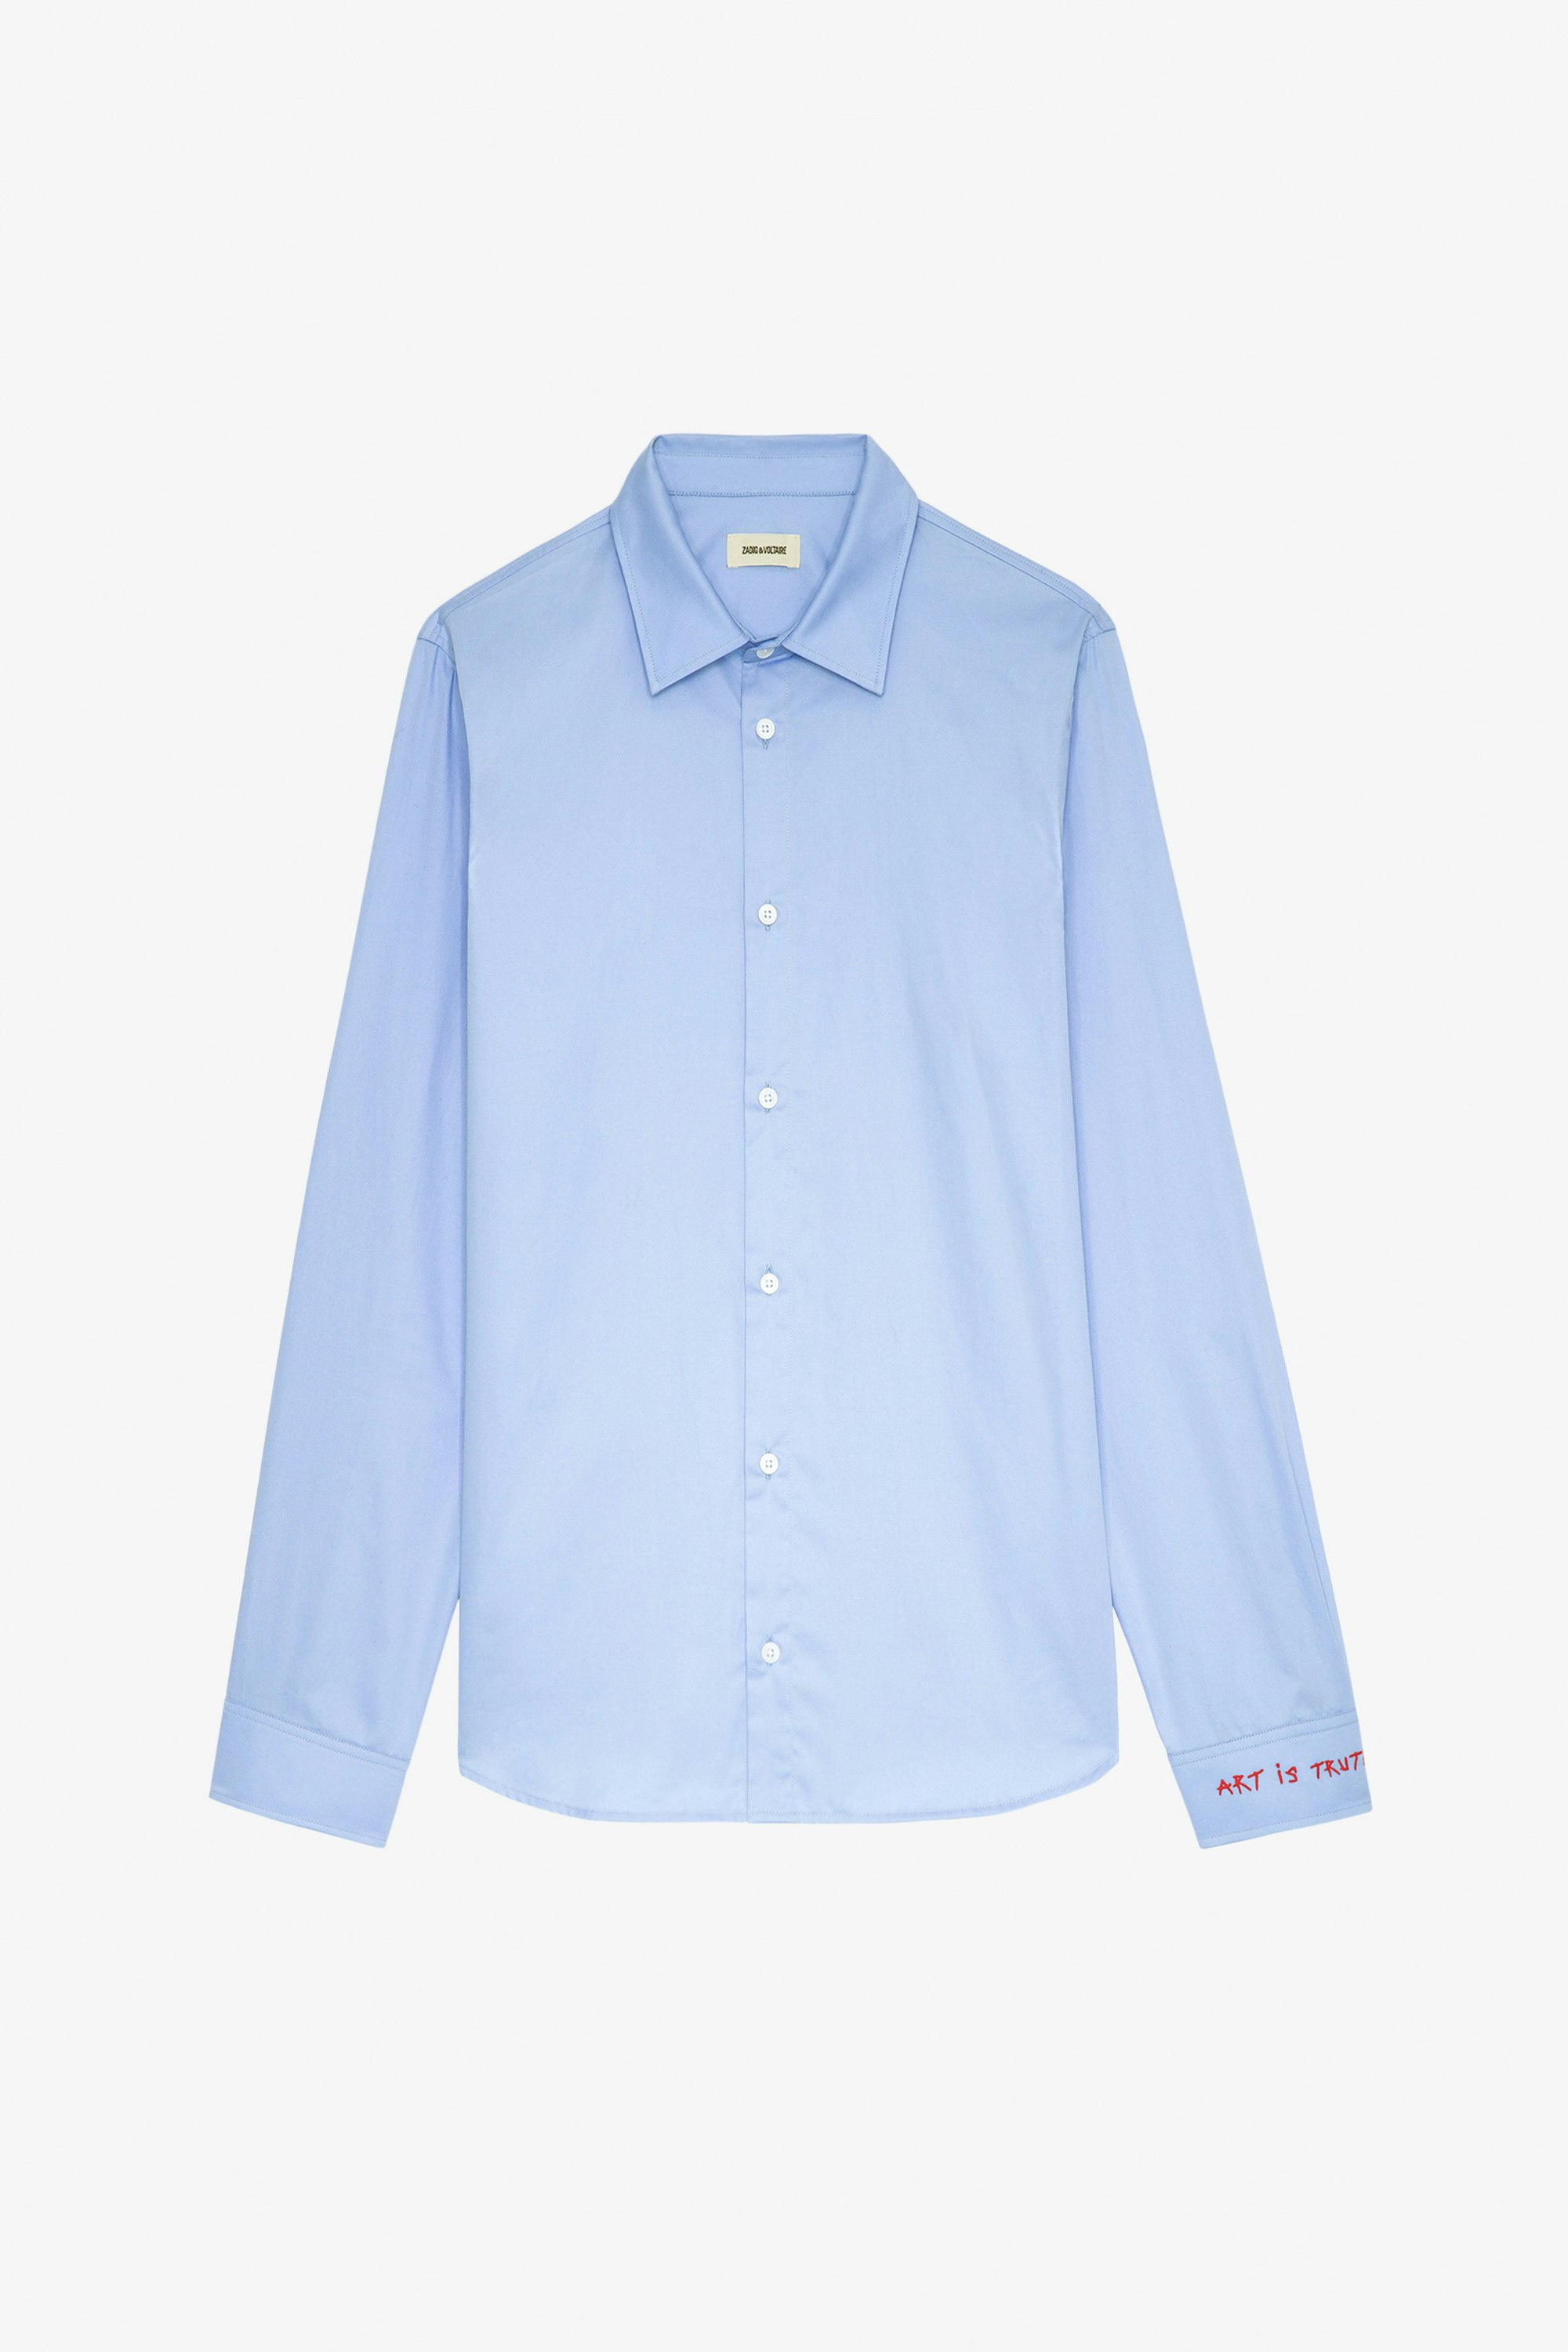 Sydney Shirt - Unisex's sky blue cotton shirt with “Art Is Truth” embroidery on the right cuff.